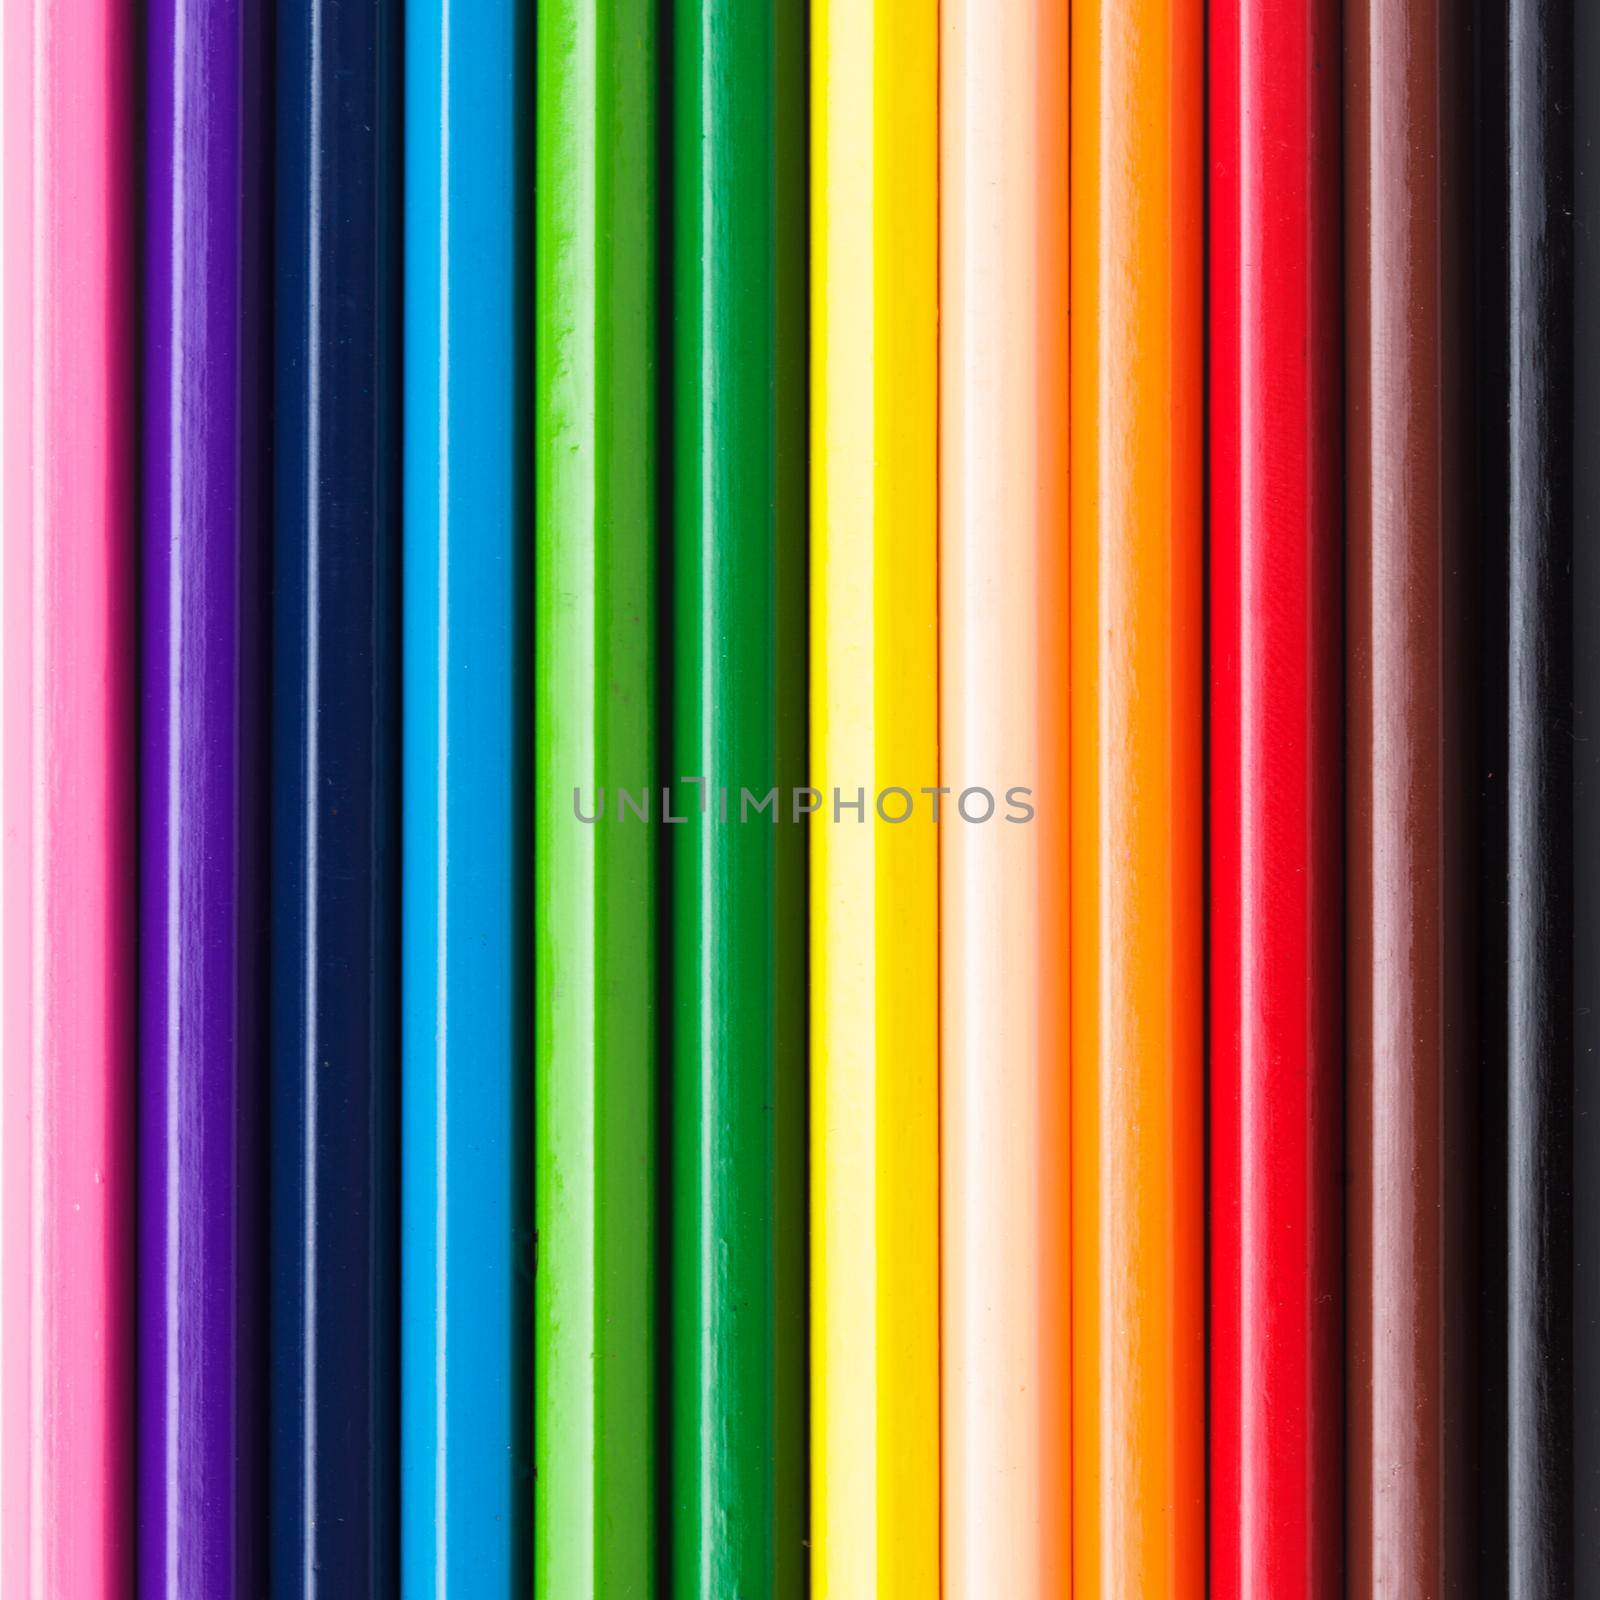 Rainbow color pencils in a row as a background